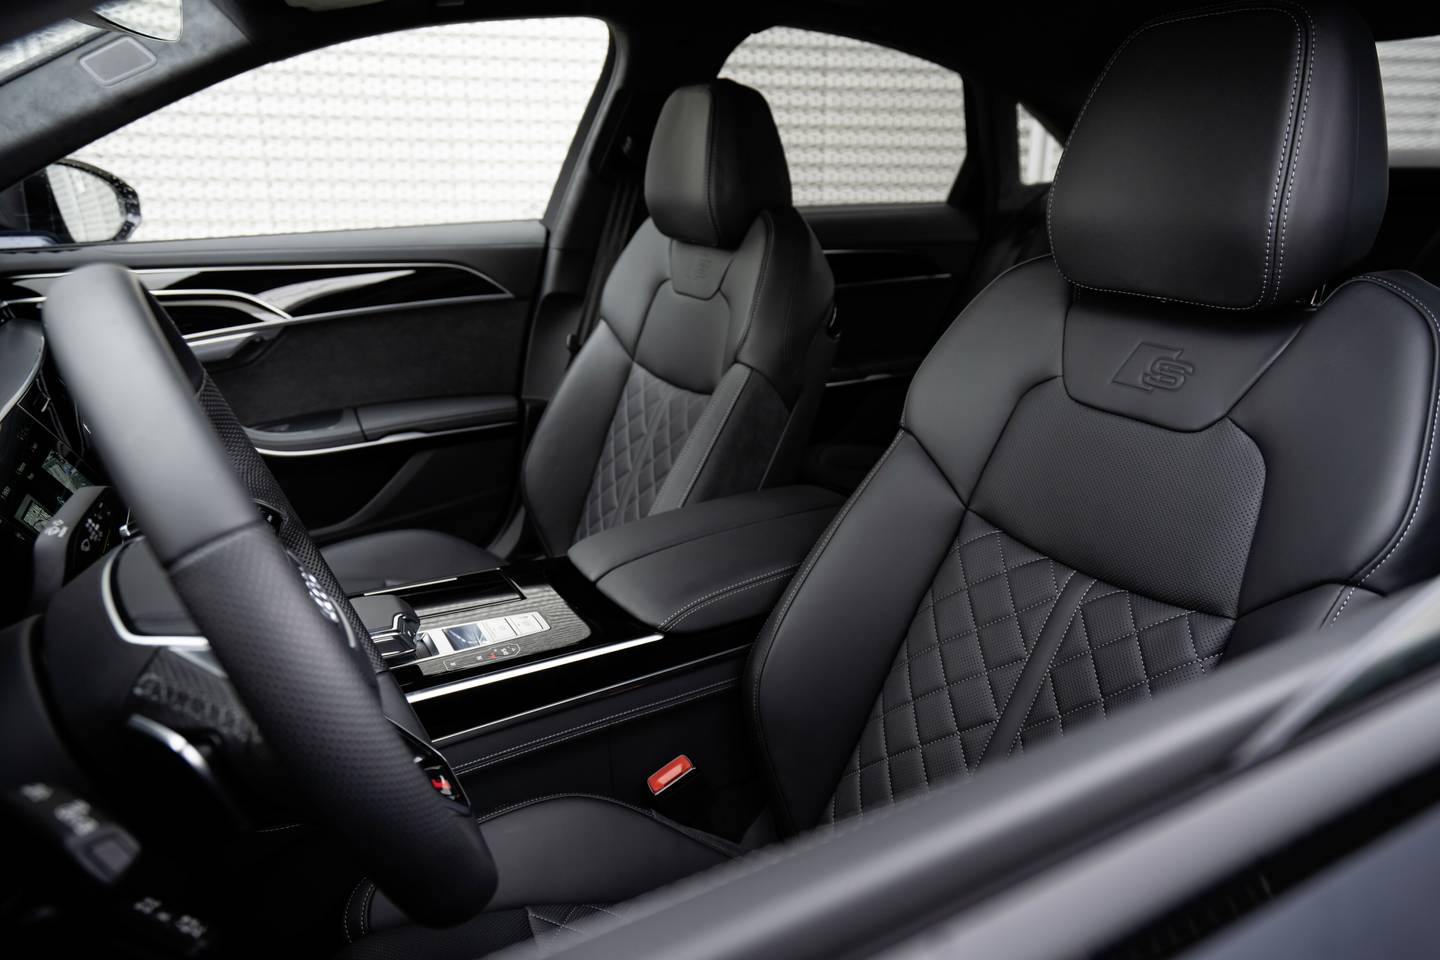 The cabins on both models are suitably elegant. Photo: Audi